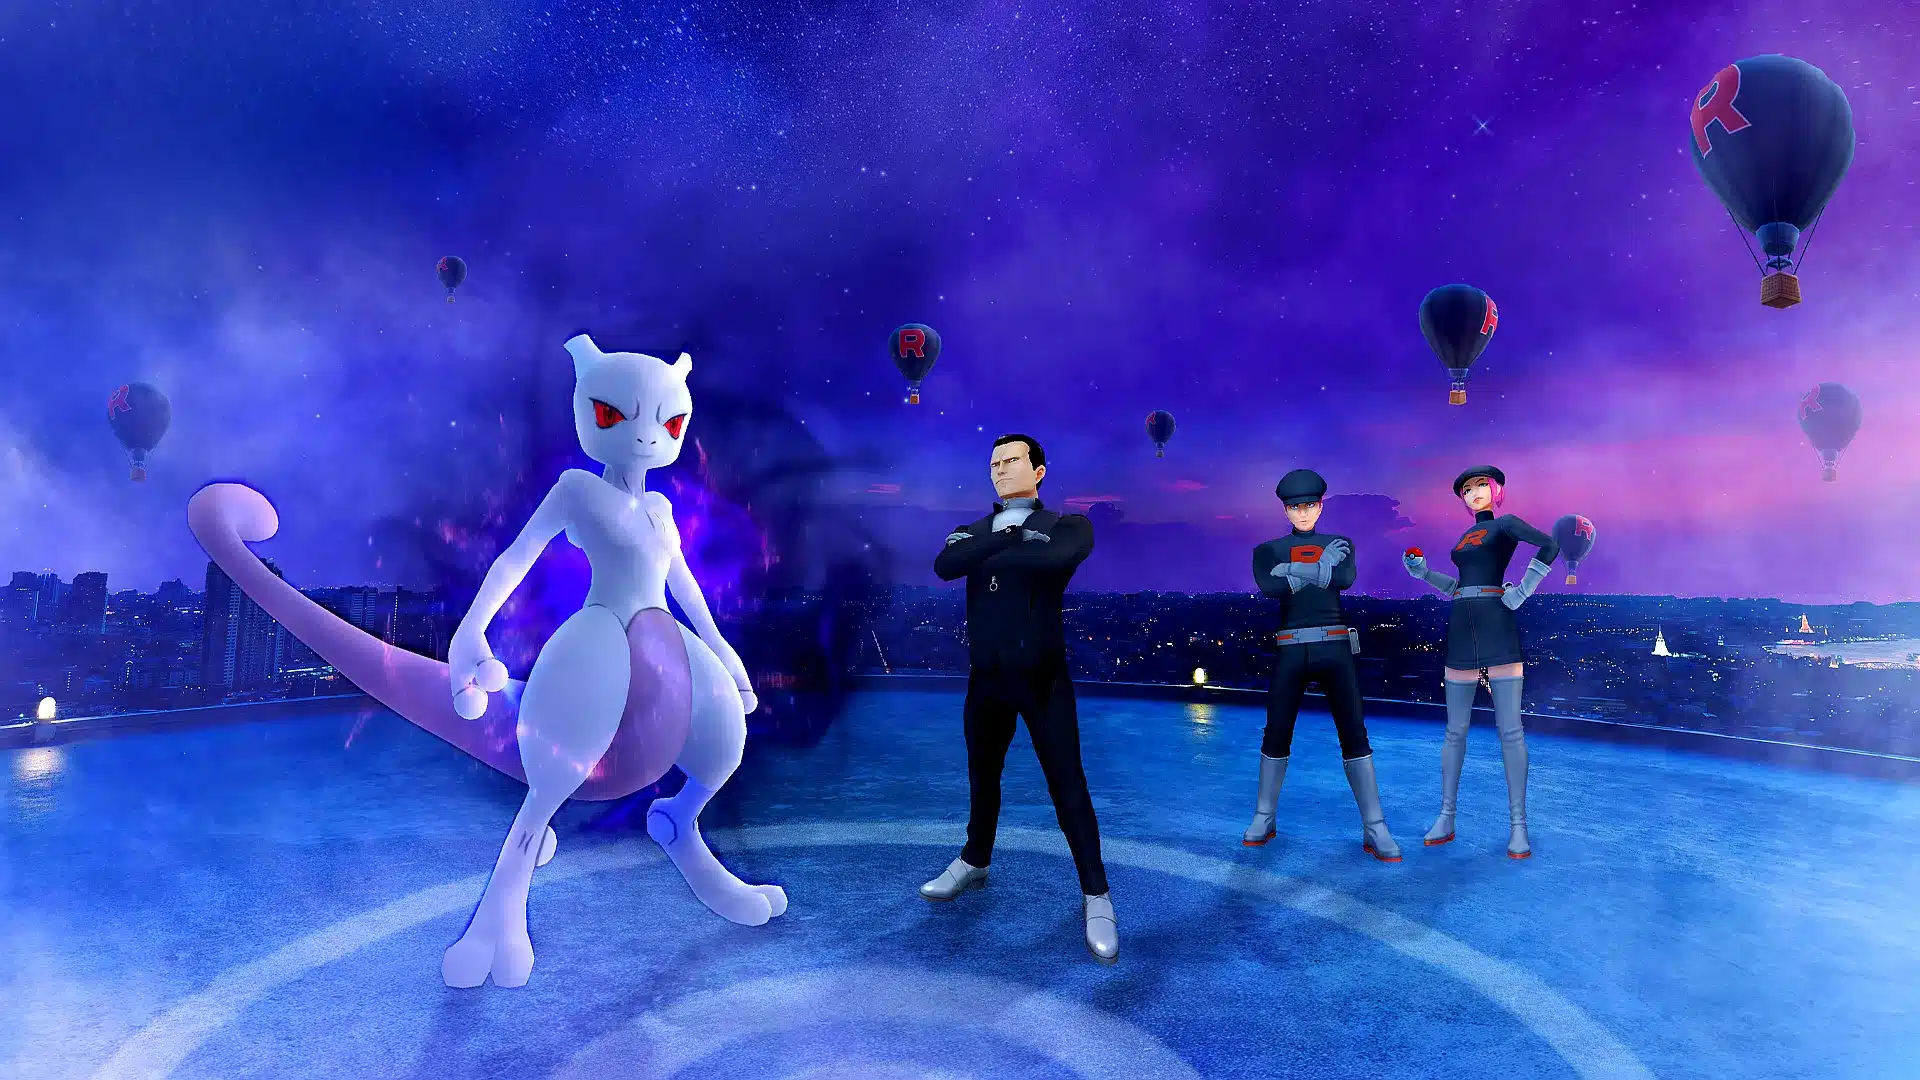 Pokémon Go Mewtwo counters  type weakness to use in raid battles